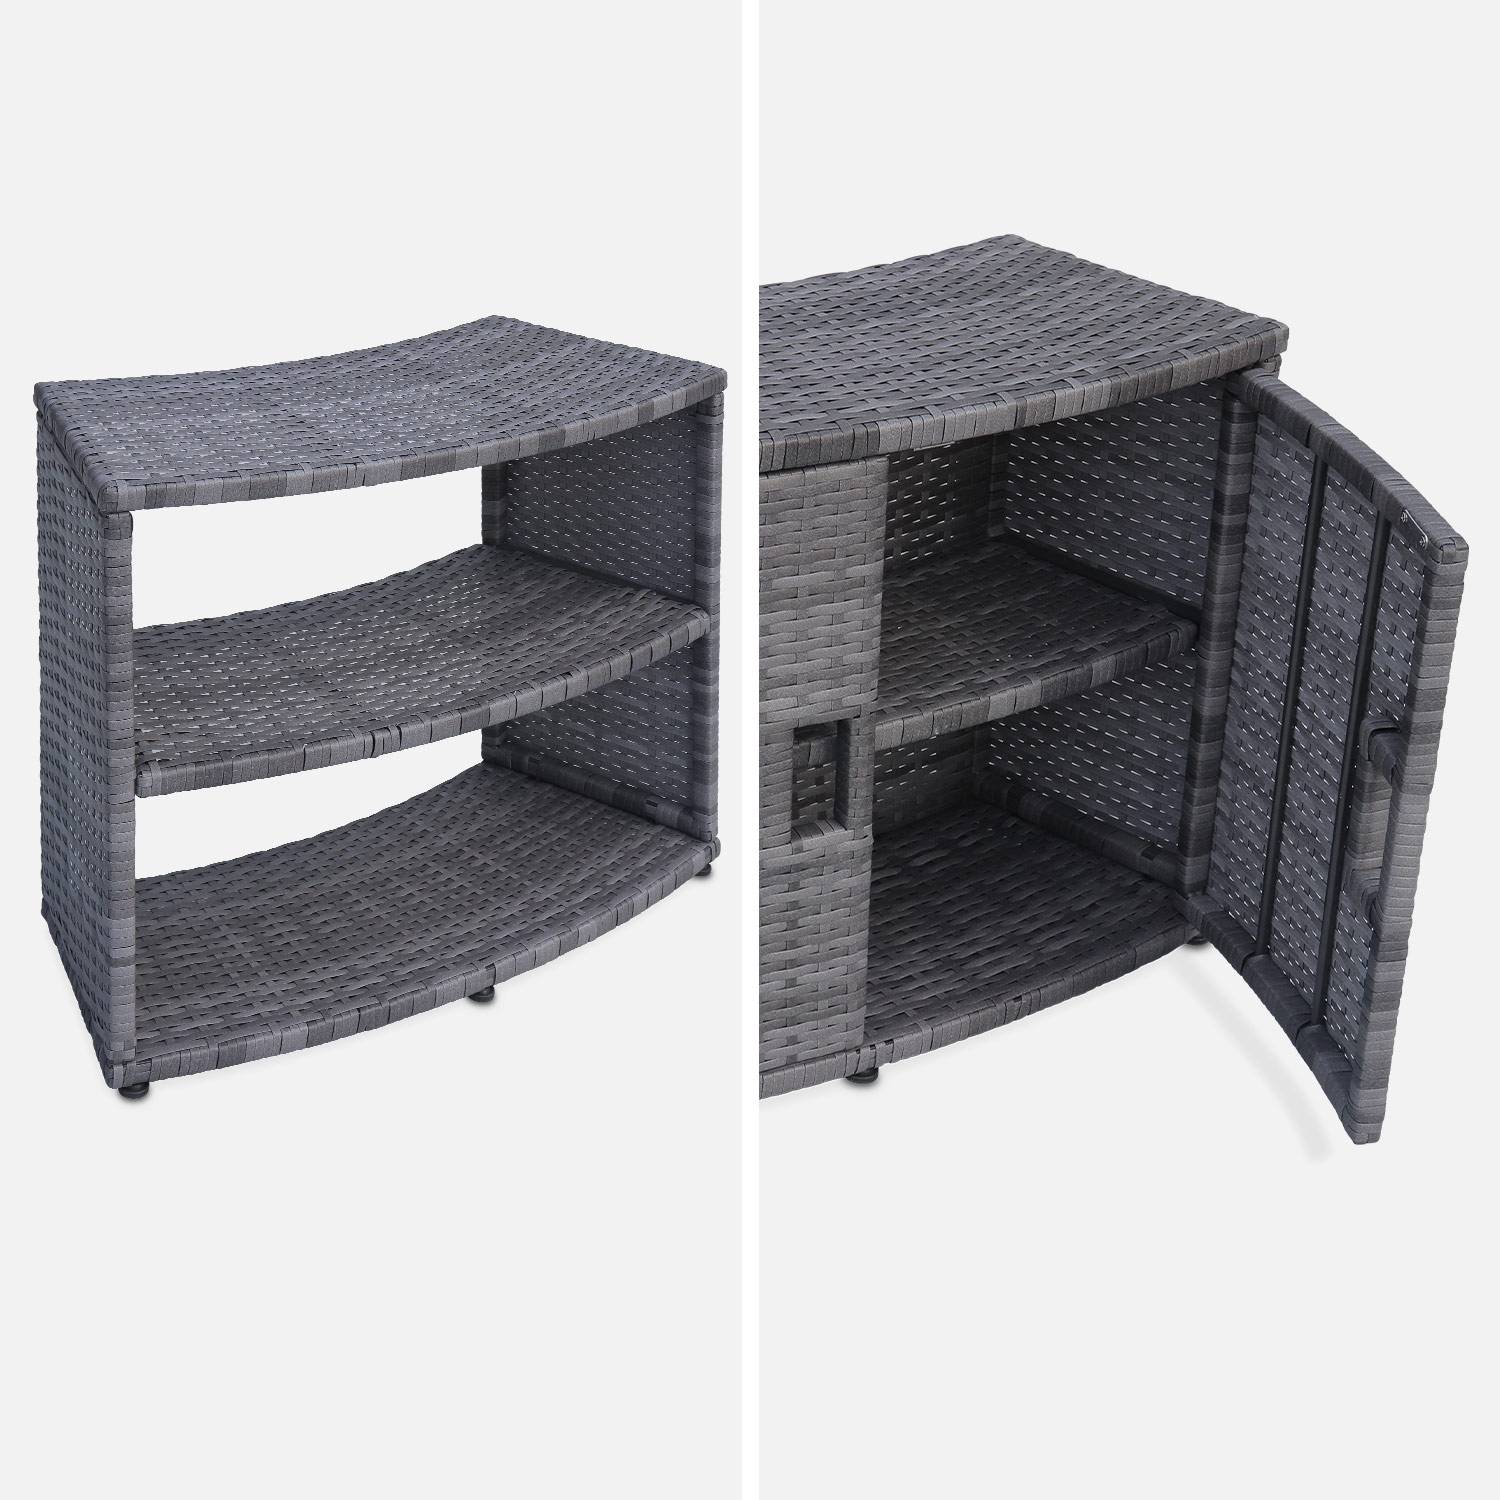 Grey polyrattan for hot tub surrond for 4 or 6 seater hot tub 180 x 70 cm - aluminium structure, shelves, cabinet and footstep,sweeek,Photo5